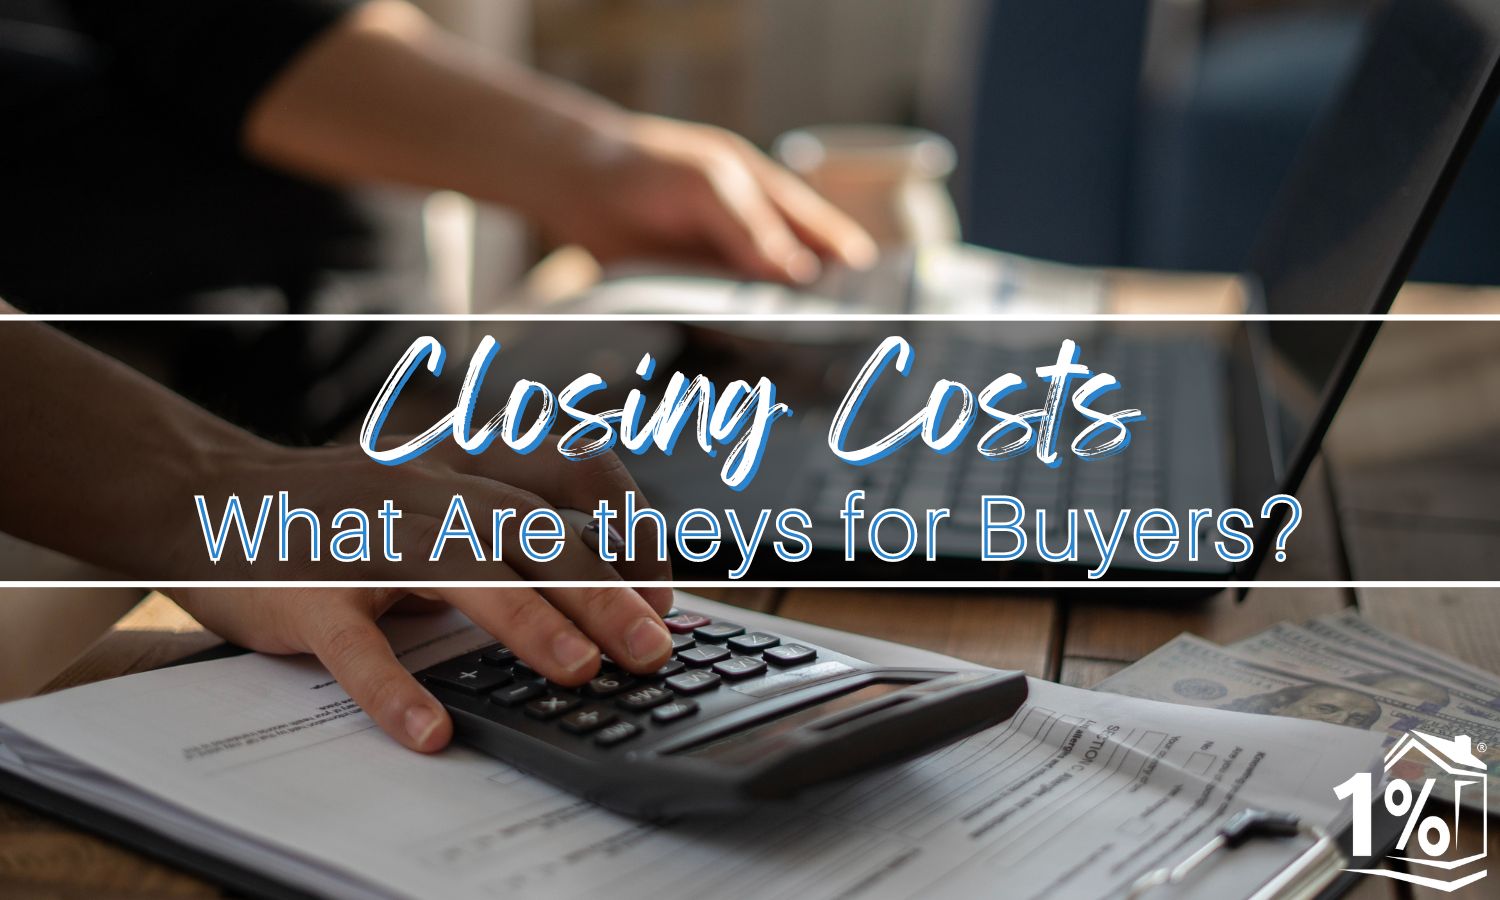 What are the Closing Costs for buyers